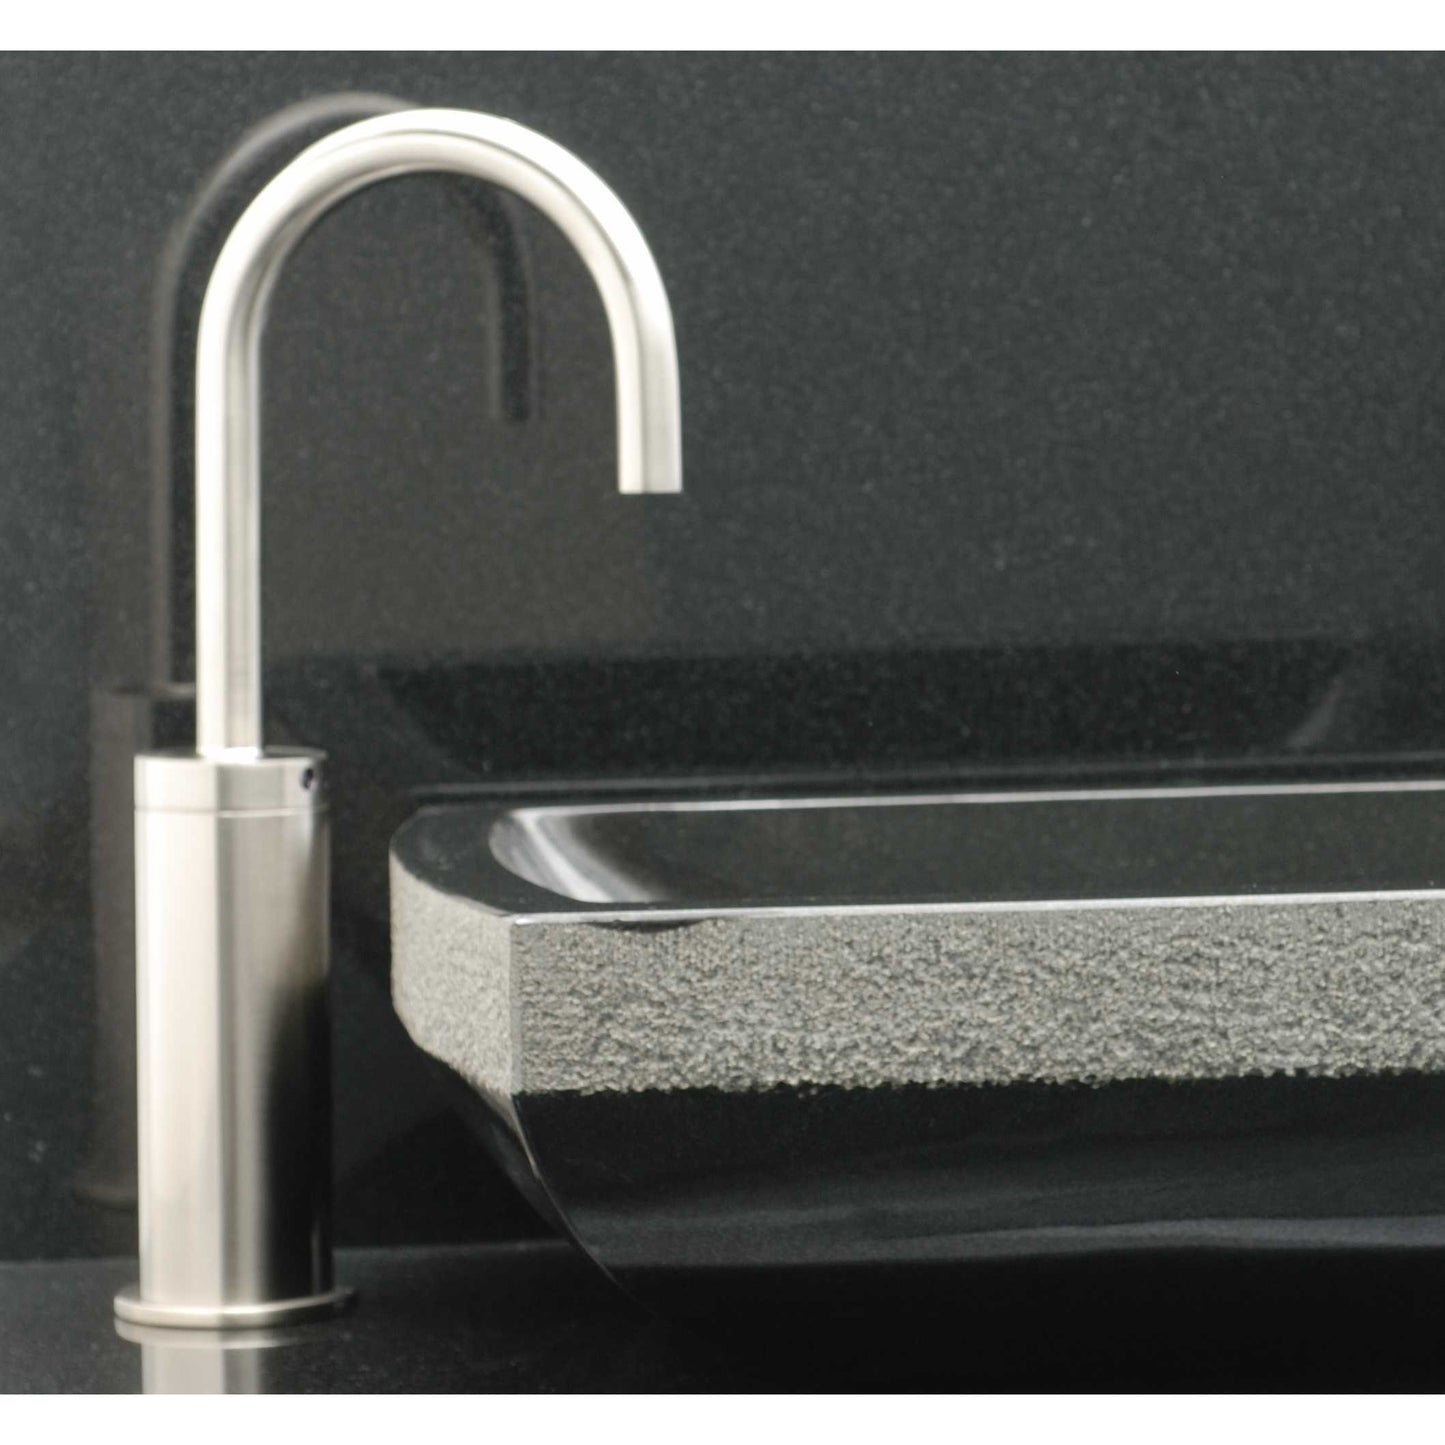 FA400-1105 Hands Free Automatic Faucet for 5 Inch Vessel Sink